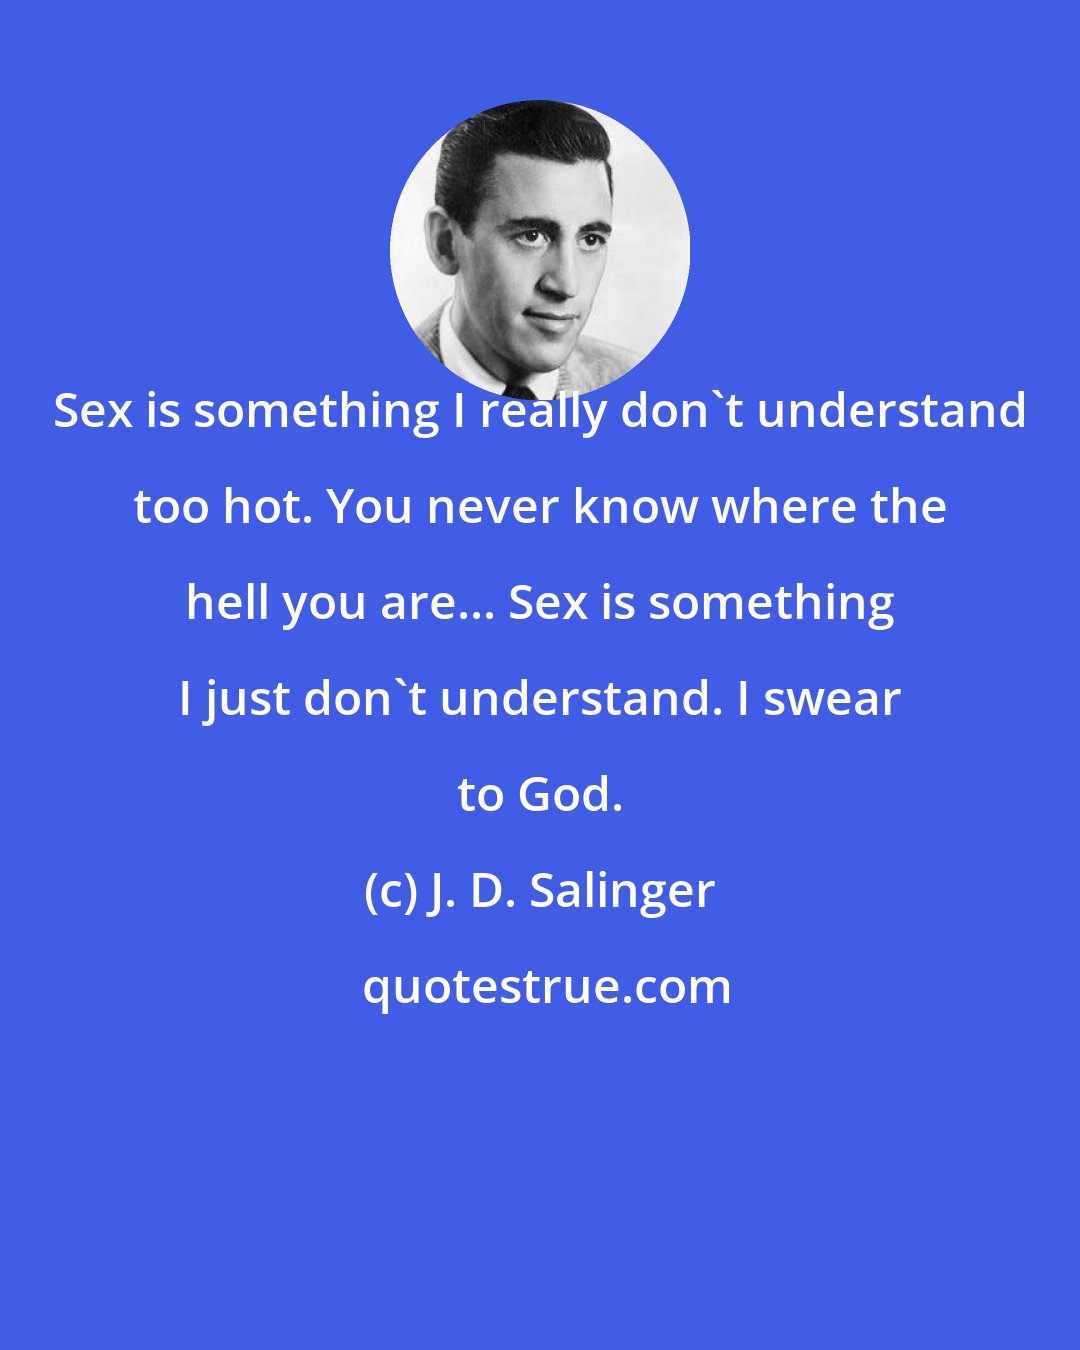 J. D. Salinger: Sex is something I really don't understand too hot. You never know where the hell you are... Sex is something I just don't understand. I swear to God.